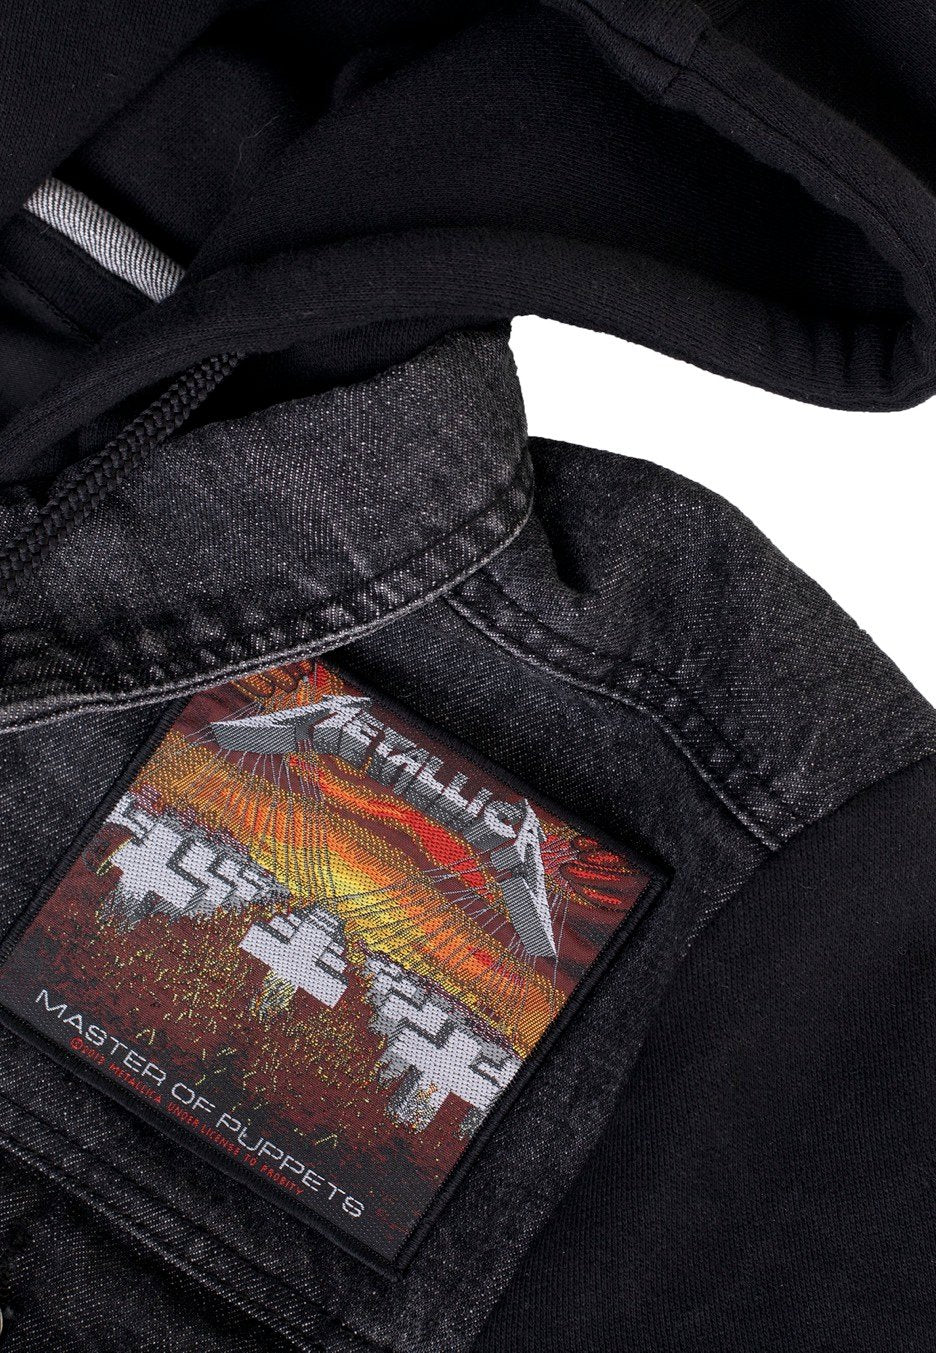 Metallica - Master Of Puppets - Patch